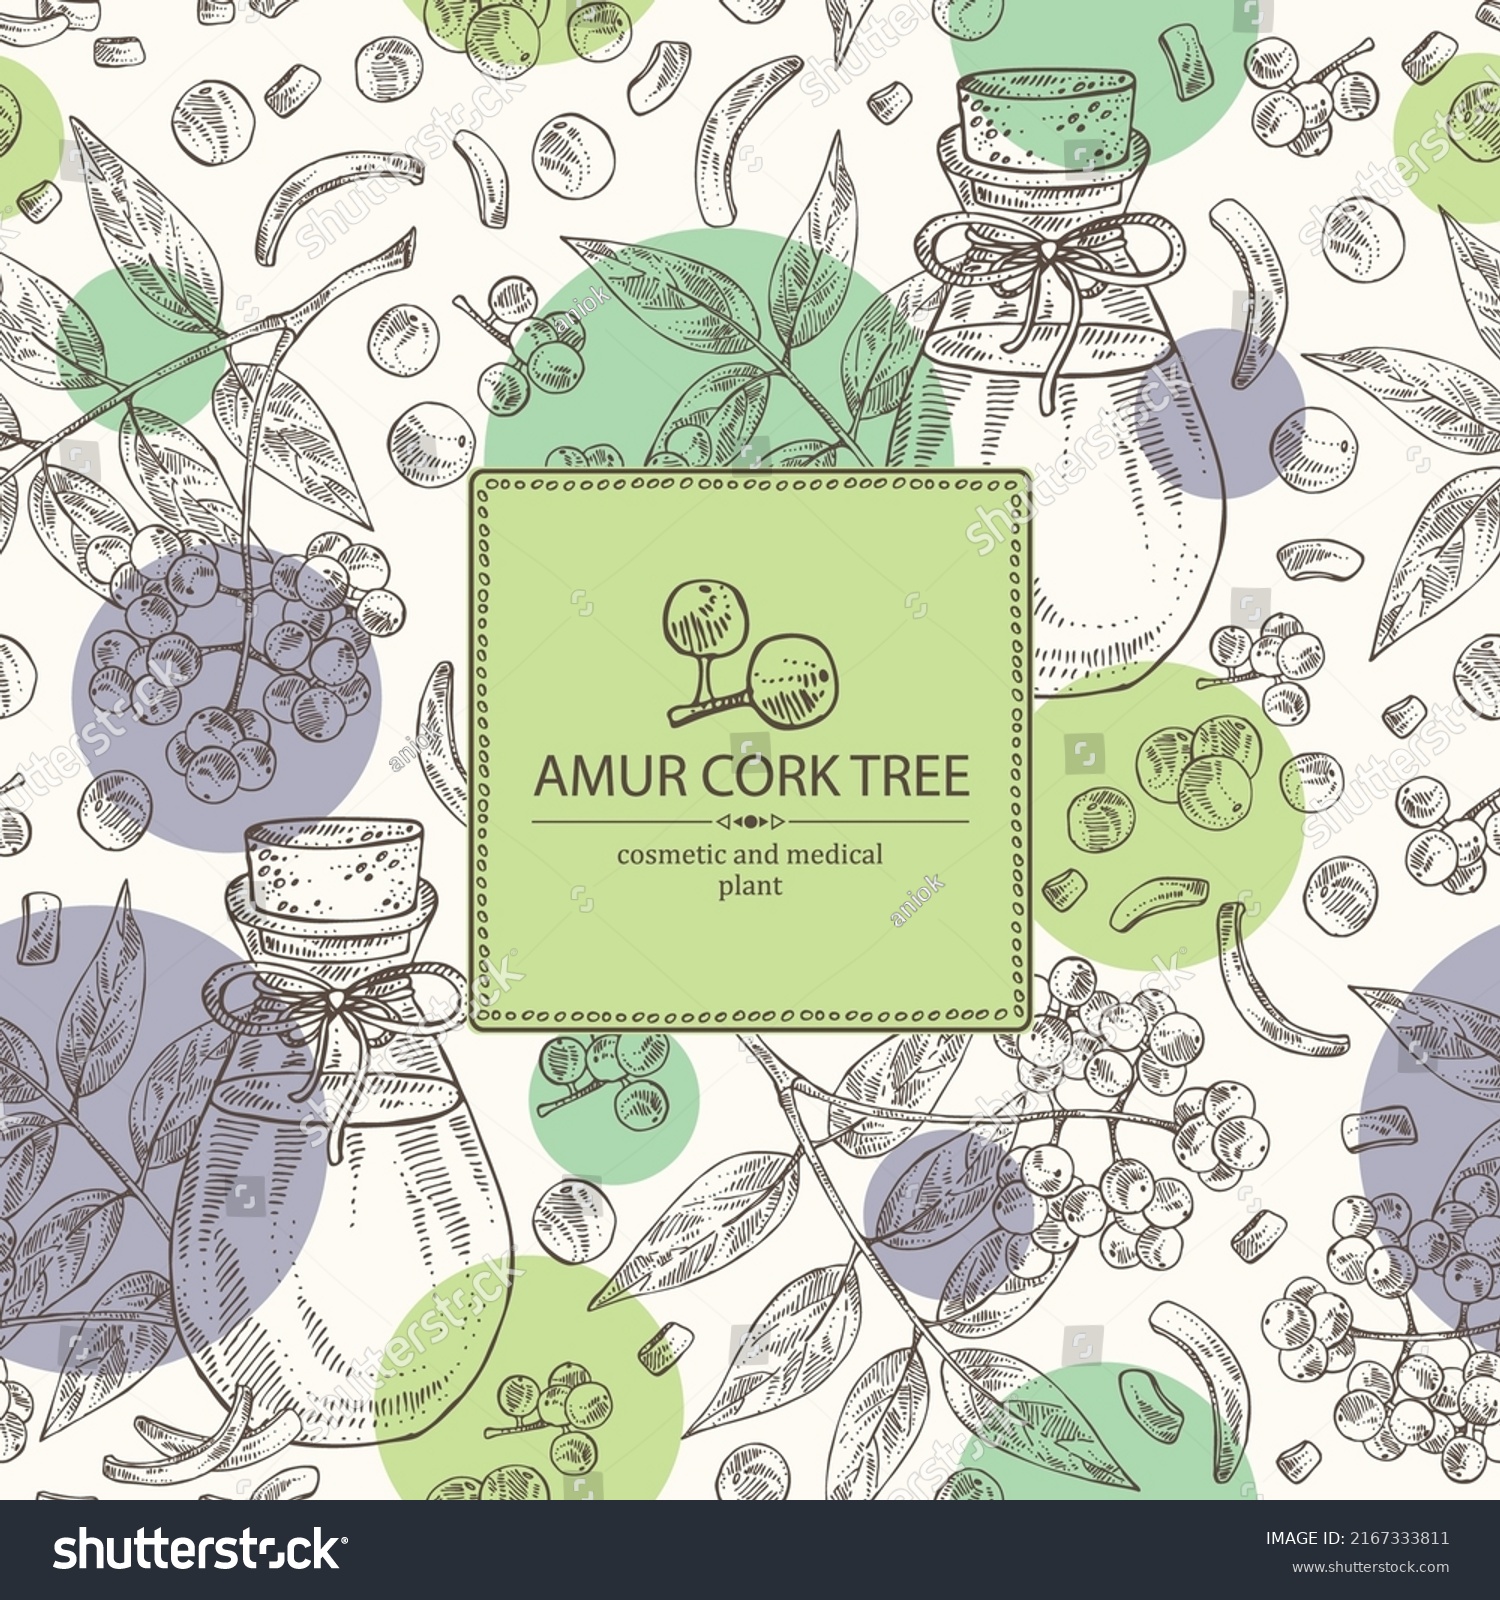 SVG of Background with amur cork tree: berries, plant, amur cork tree bark and bottle of amur cork tree oil. Phellodendron amurense.  Cosmetic, perfumery and medical plant. svg